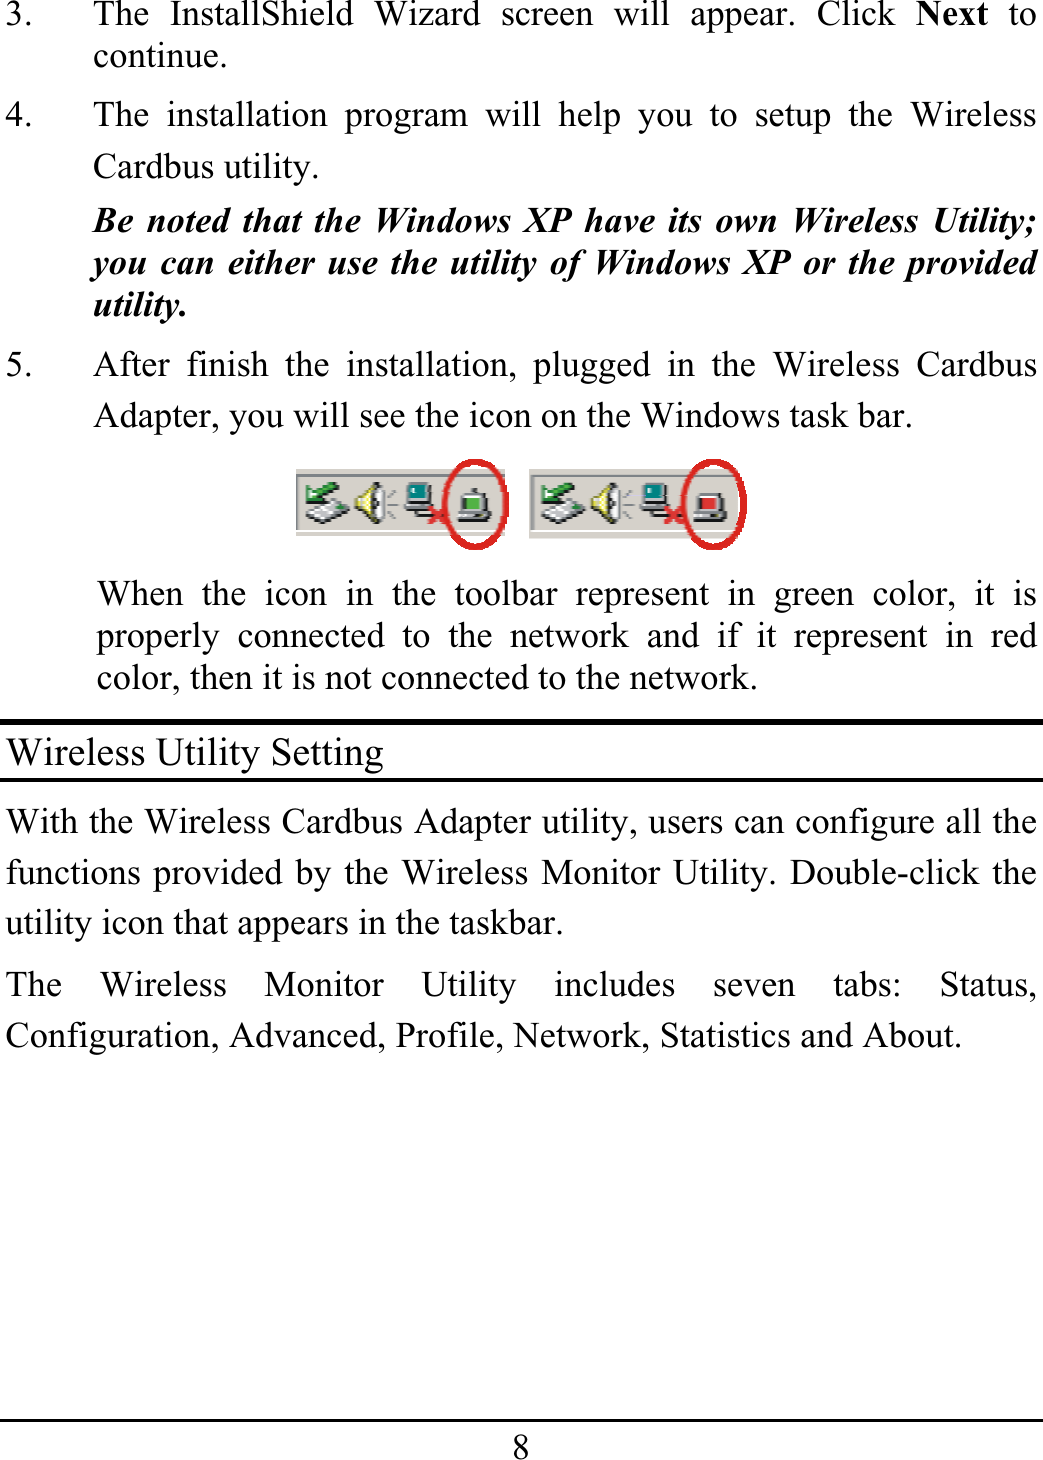 83.  The InstallShield Wizard screen will appear. Click Next to continue.  4.  The installation program will help you to setup the Wireless Cardbus utility. Be noted that the Windows XP have its own Wireless Utility; you can either use the utility of Windows XP or the provided utility. 5.  After finish the installation, plugged in the Wireless Cardbus Adapter, you will see the icon on the Windows task bar. When the icon in the toolbar represent in green color, it is properly connected to the network and if it represent in red color, then it is not connected to the network. Wireless Utility Setting With the Wireless Cardbus Adapter utility, users can configure all the functions provided by the Wireless Monitor Utility. Double-click the utility icon that appears in the taskbar. The Wireless Monitor Utility includes seven tabs: Status, Configuration, Advanced, Profile, Network, Statistics and About. 